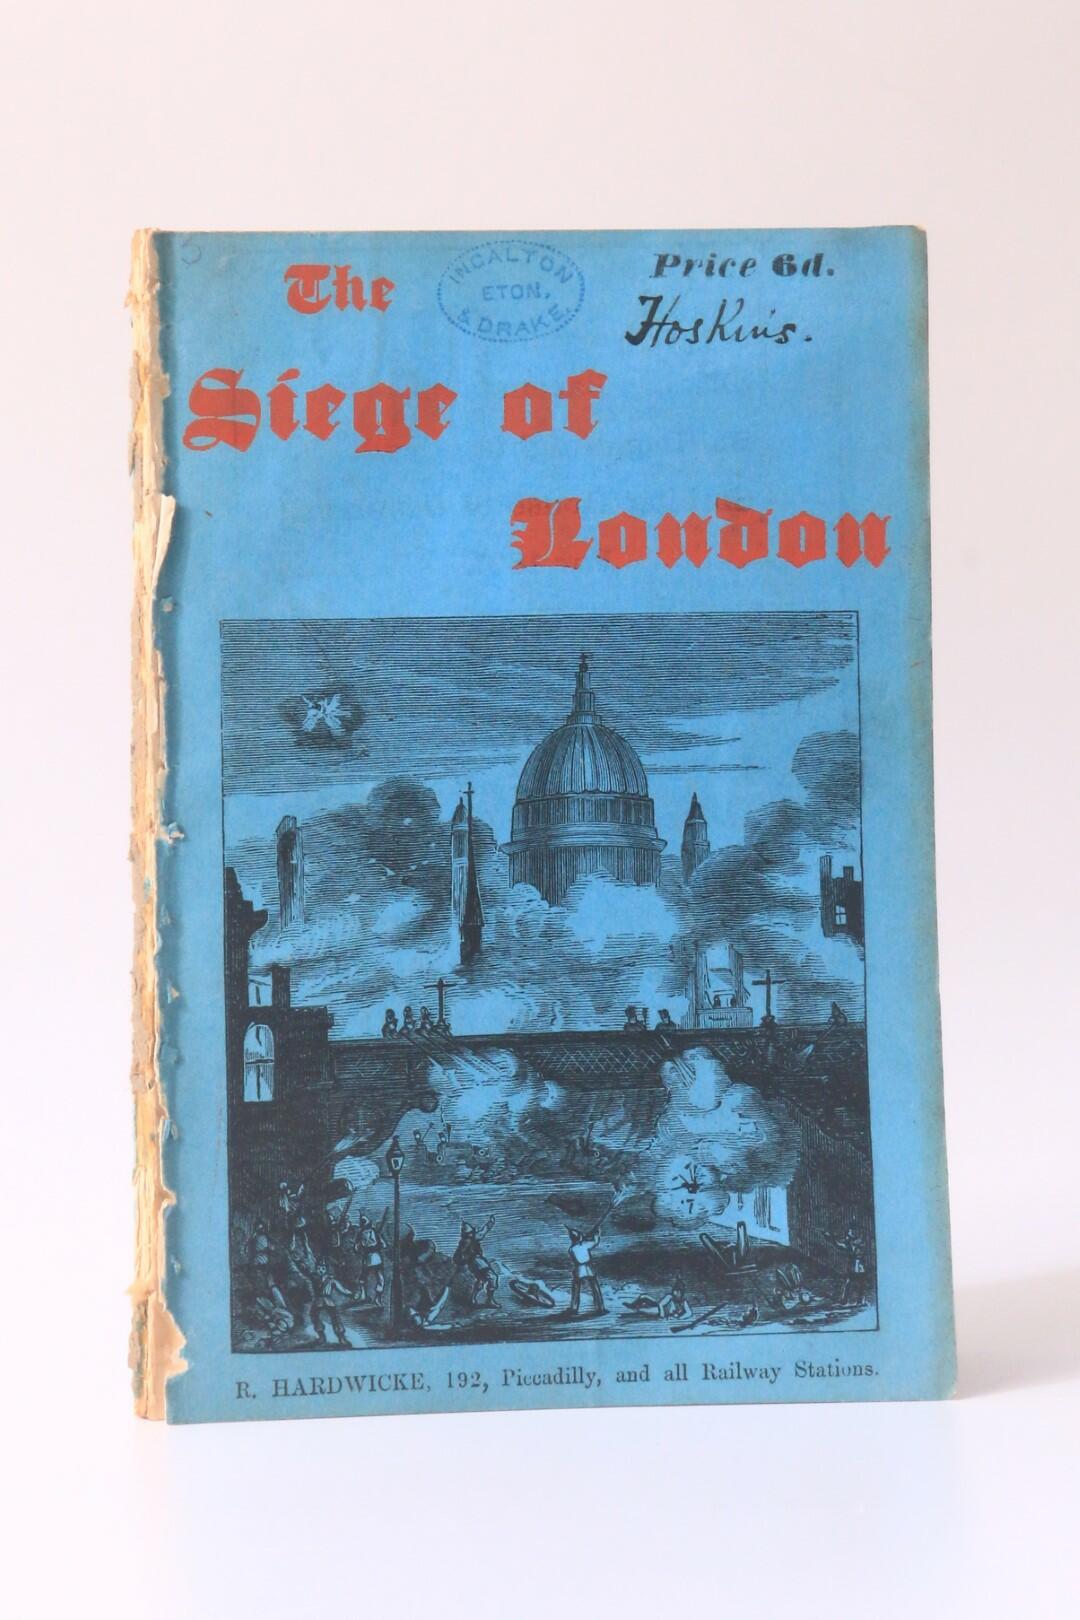 J.W.M. - The Siege of London: Reminiscences of 'Another Volunteer' - R. Hardwicke, 1871, First Edition.